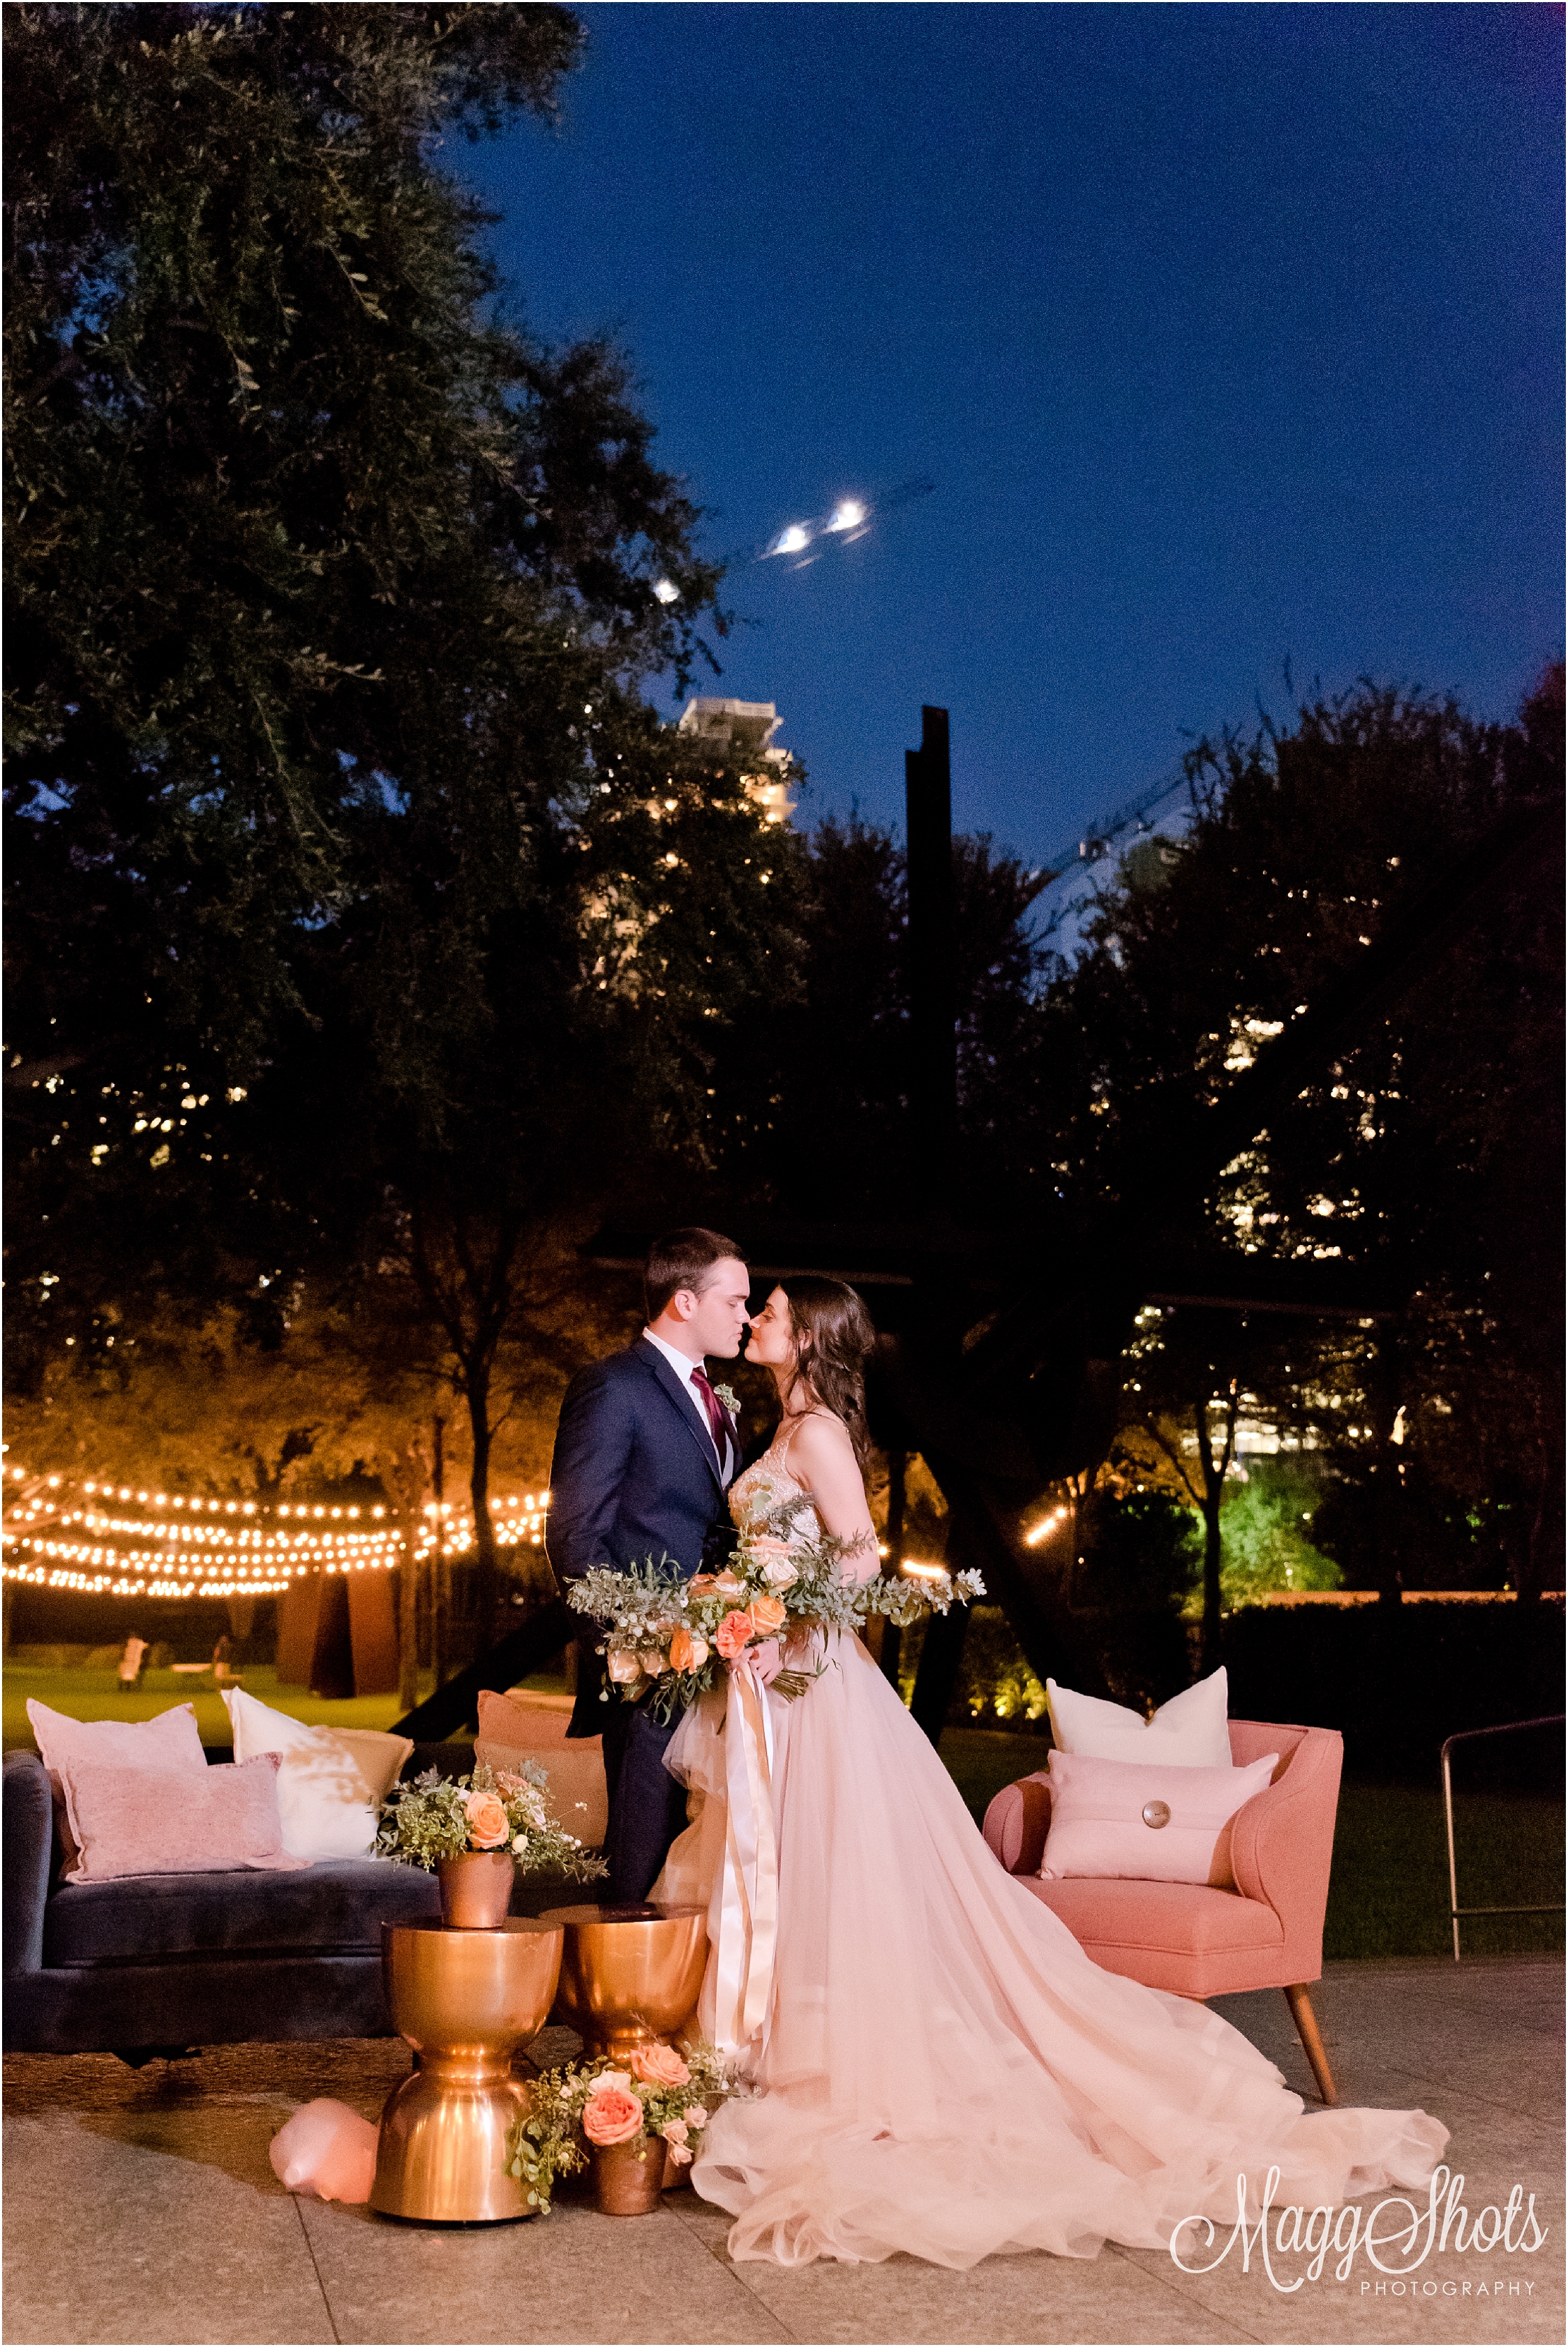 Styled Shoot, Wedding, Love, MaggShots Photography, MaggShots, Professional Photography, Professional Photographer, Couple, Bouquet, Flowers, Ring, The Washer Sculpture Center, Dallas, Bride and Groom, Kiss, Night, Lights, Detail, Lounge